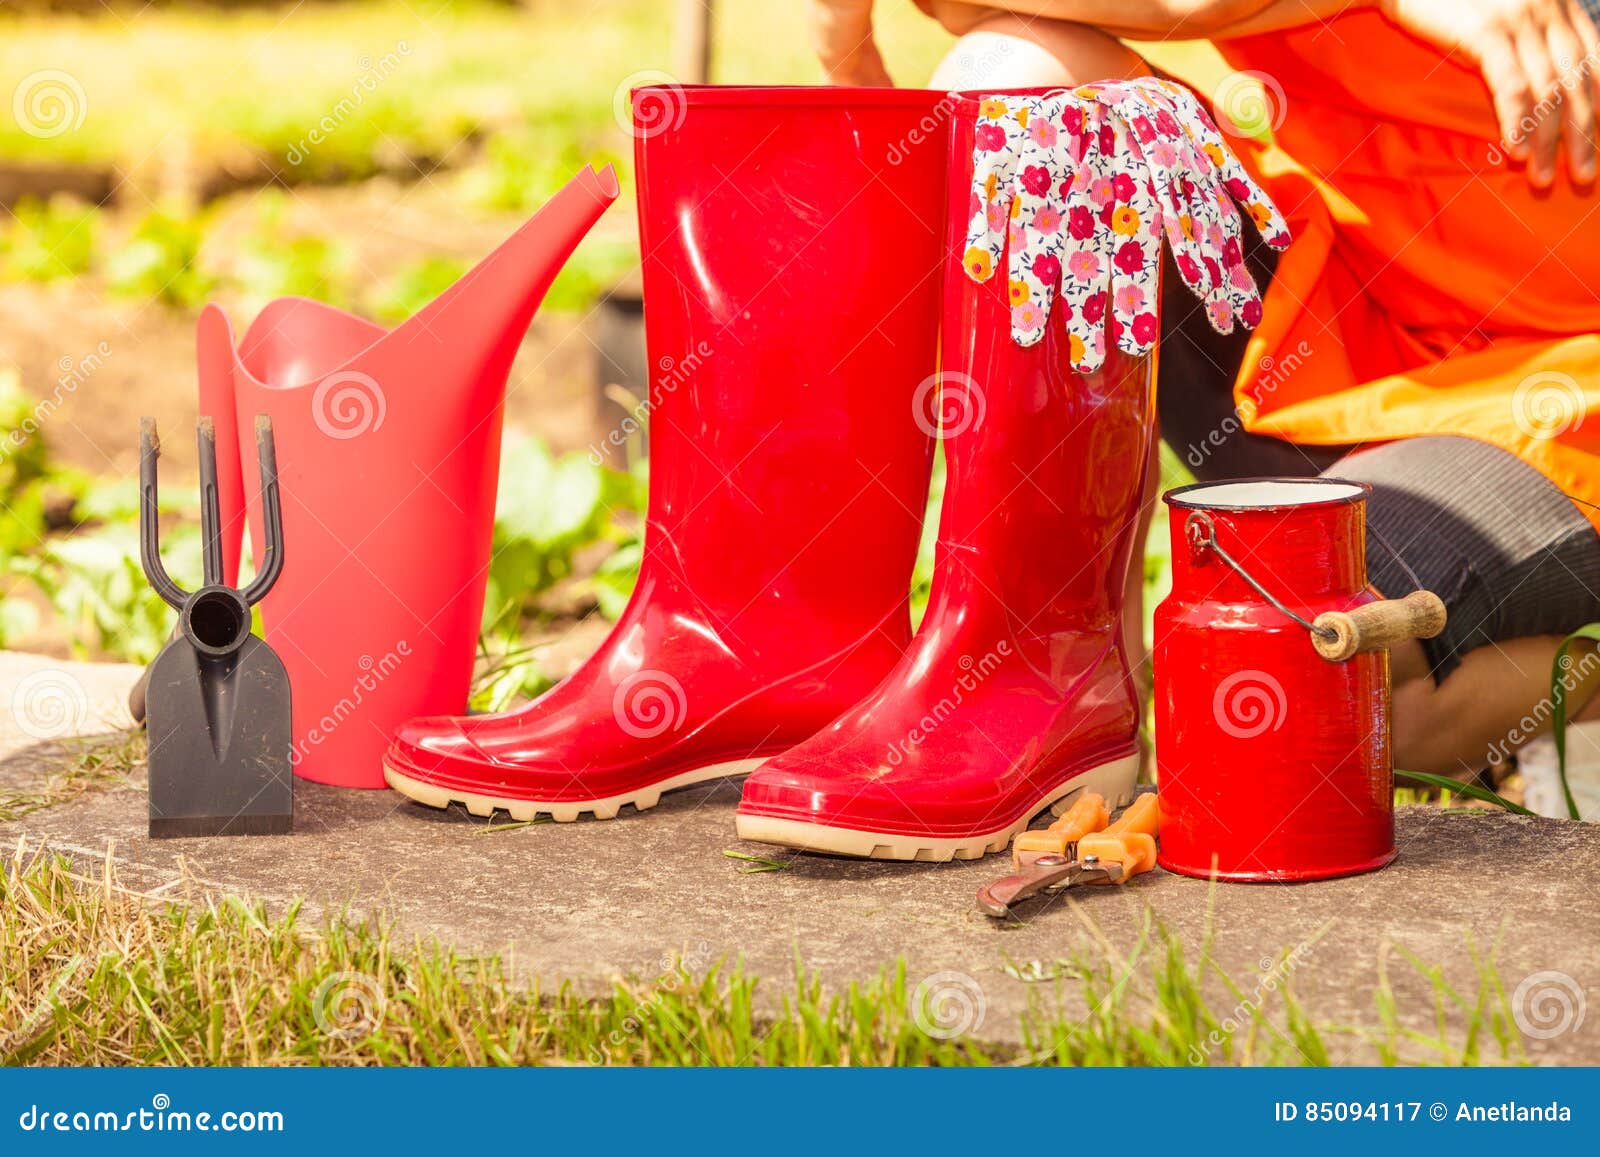 Female Farmer and Gardening Tools in Garden Stock Image - Image of ...